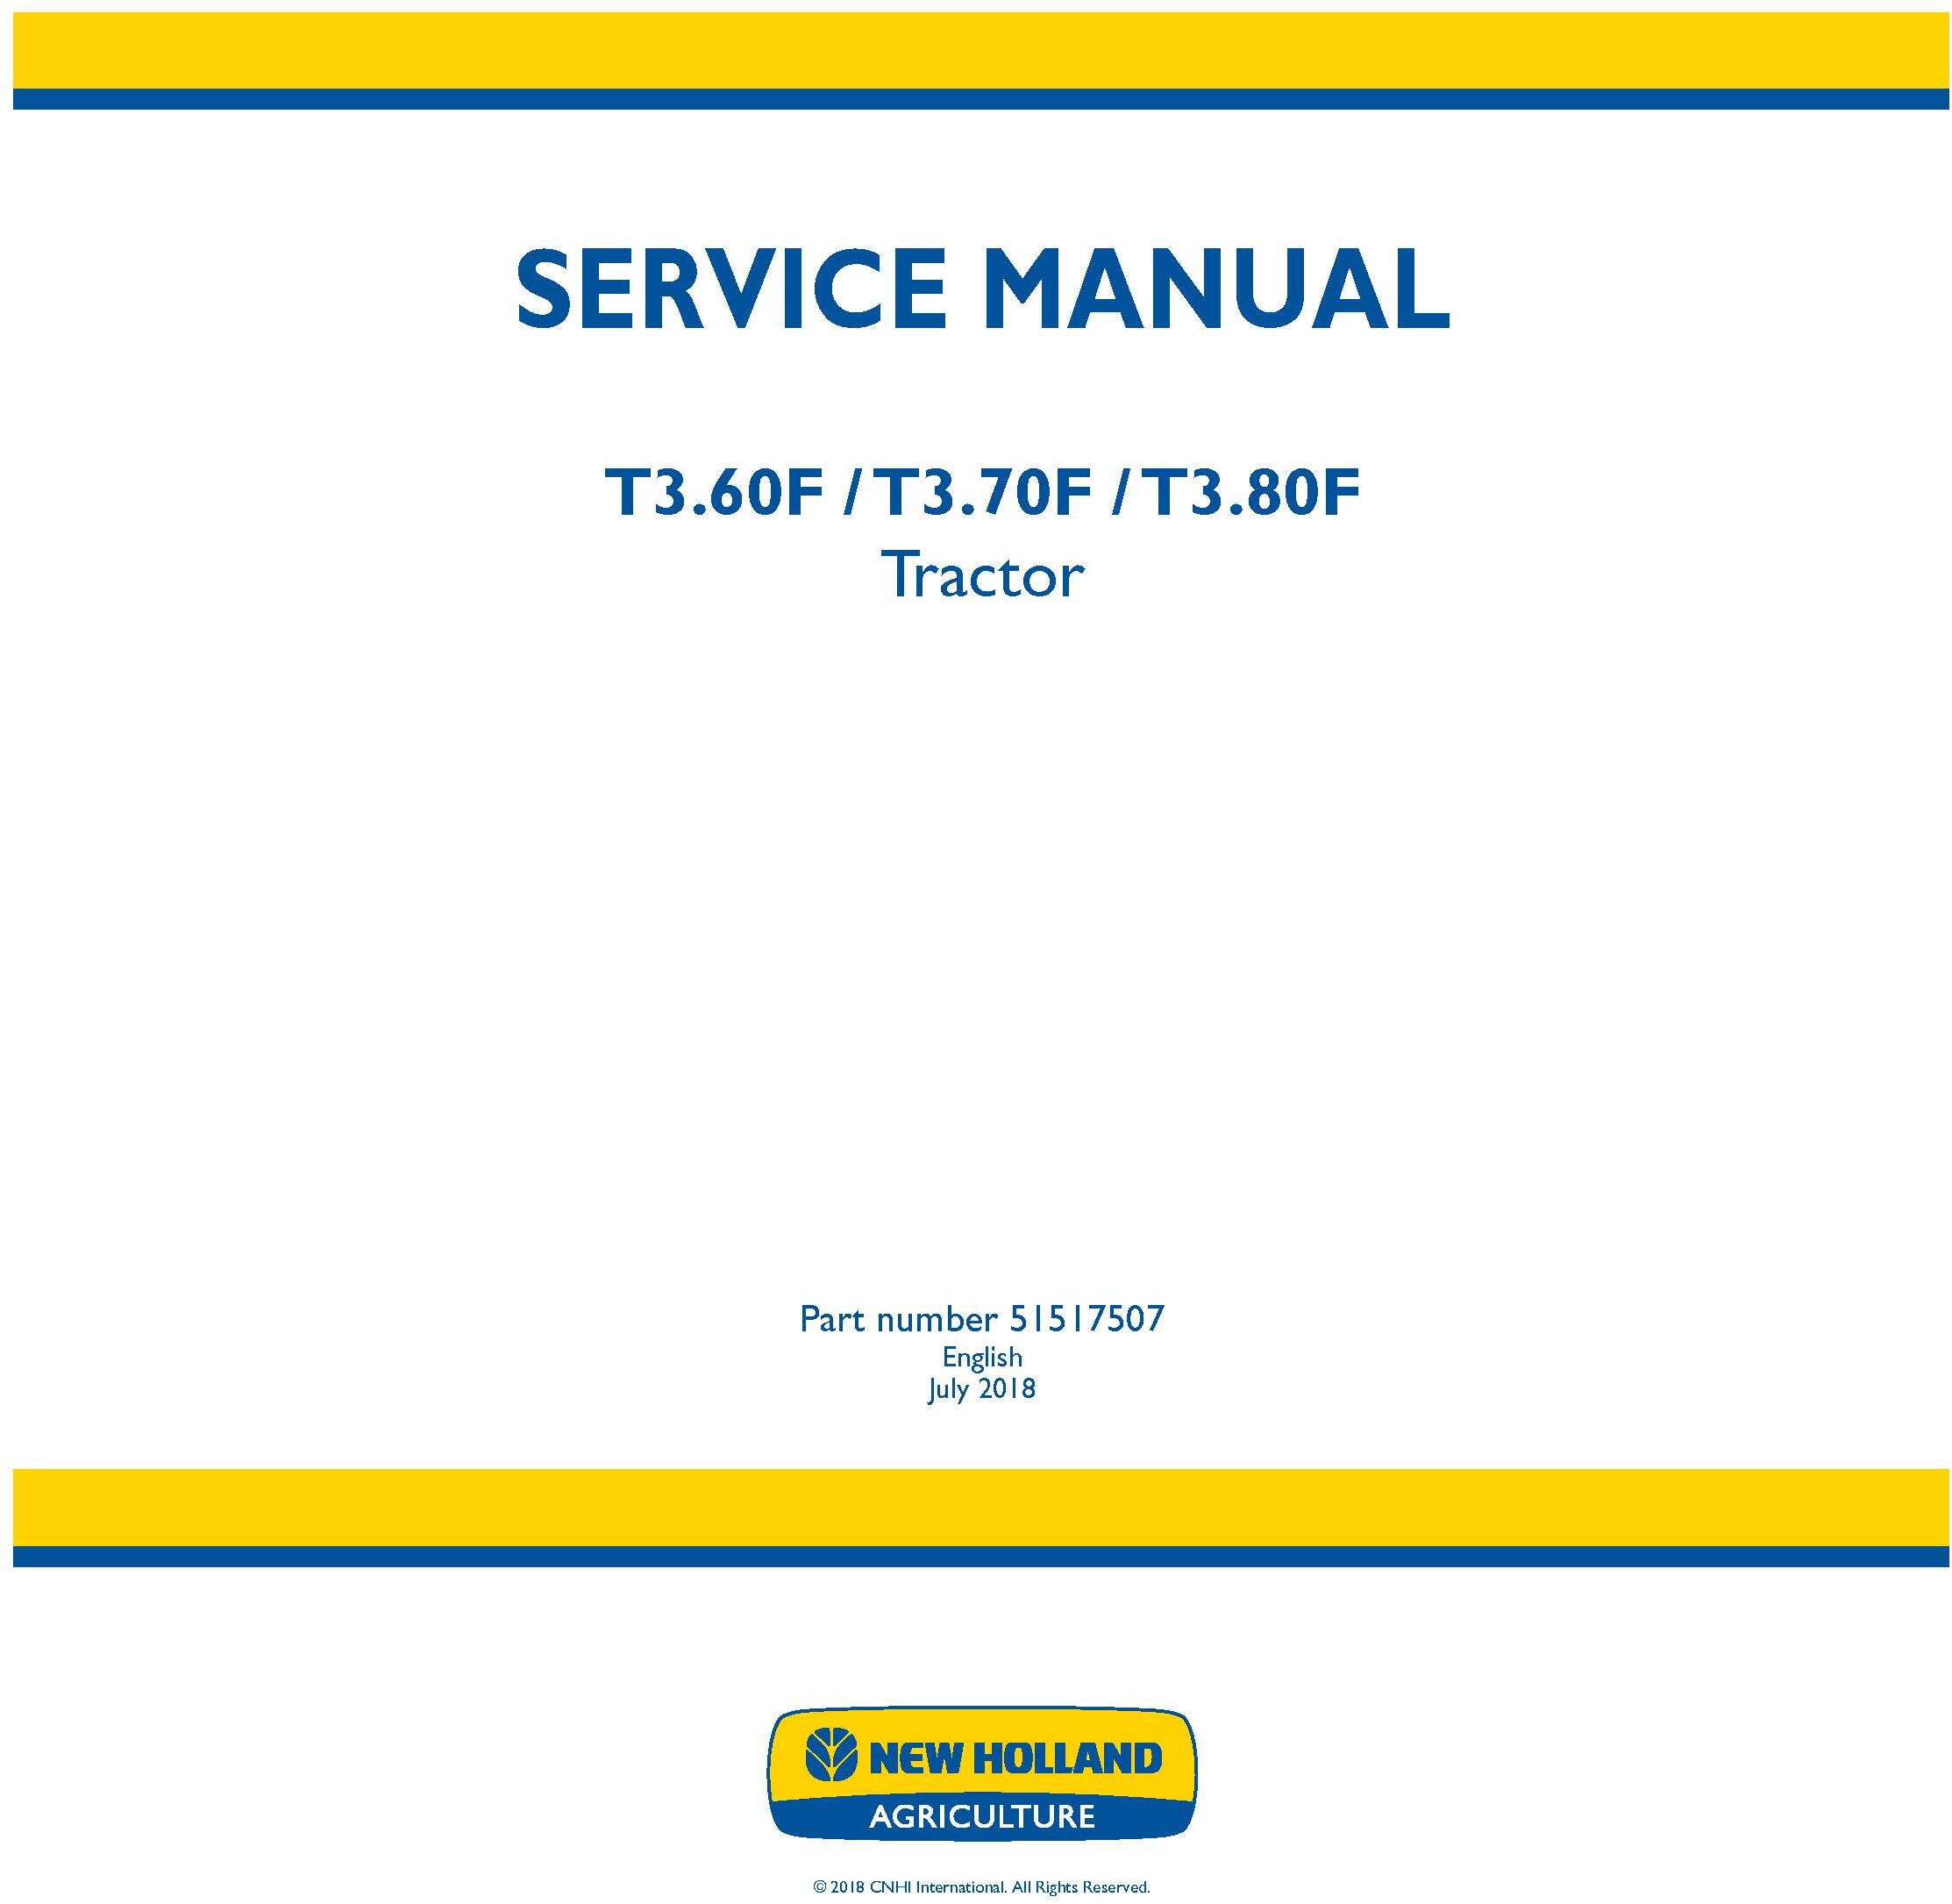 New Holland T3.60F, T3.70F, T3.80F Tractor Service Manual (Europe, Africa) - 19520